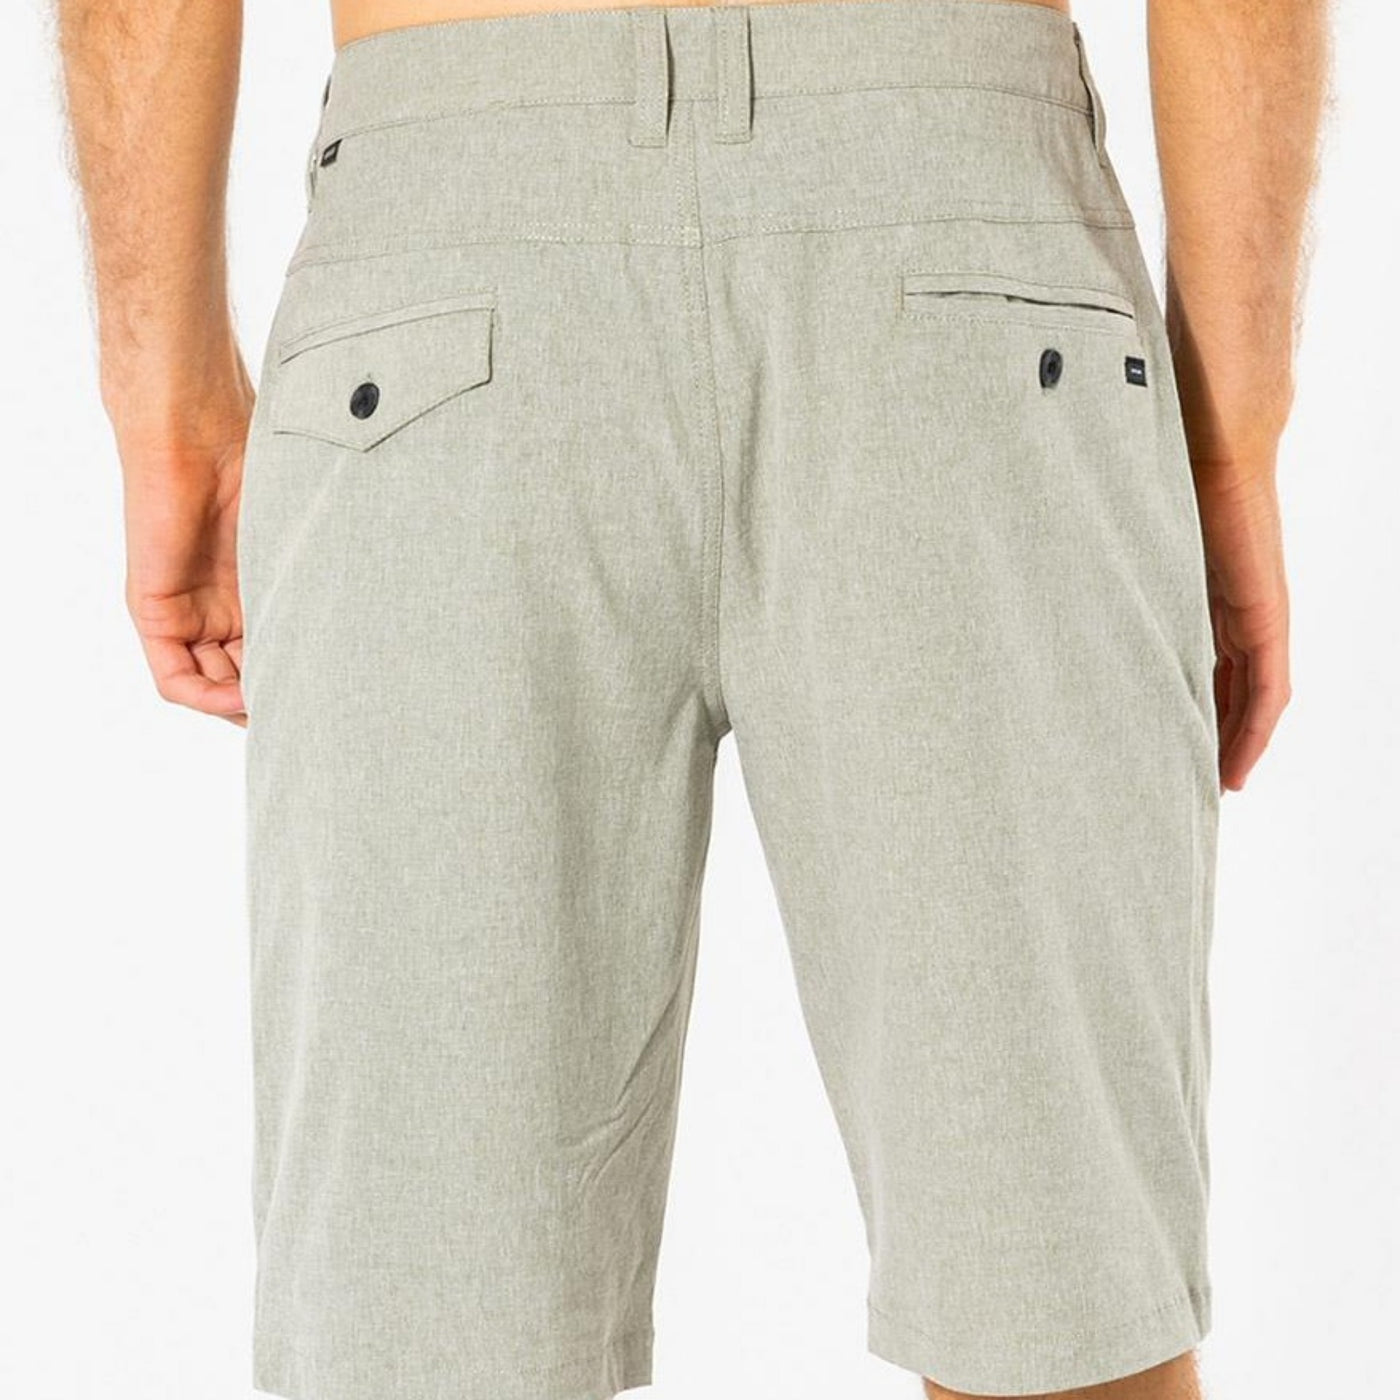 Rip Curl Phase Nineteen Short - Dusty Olive